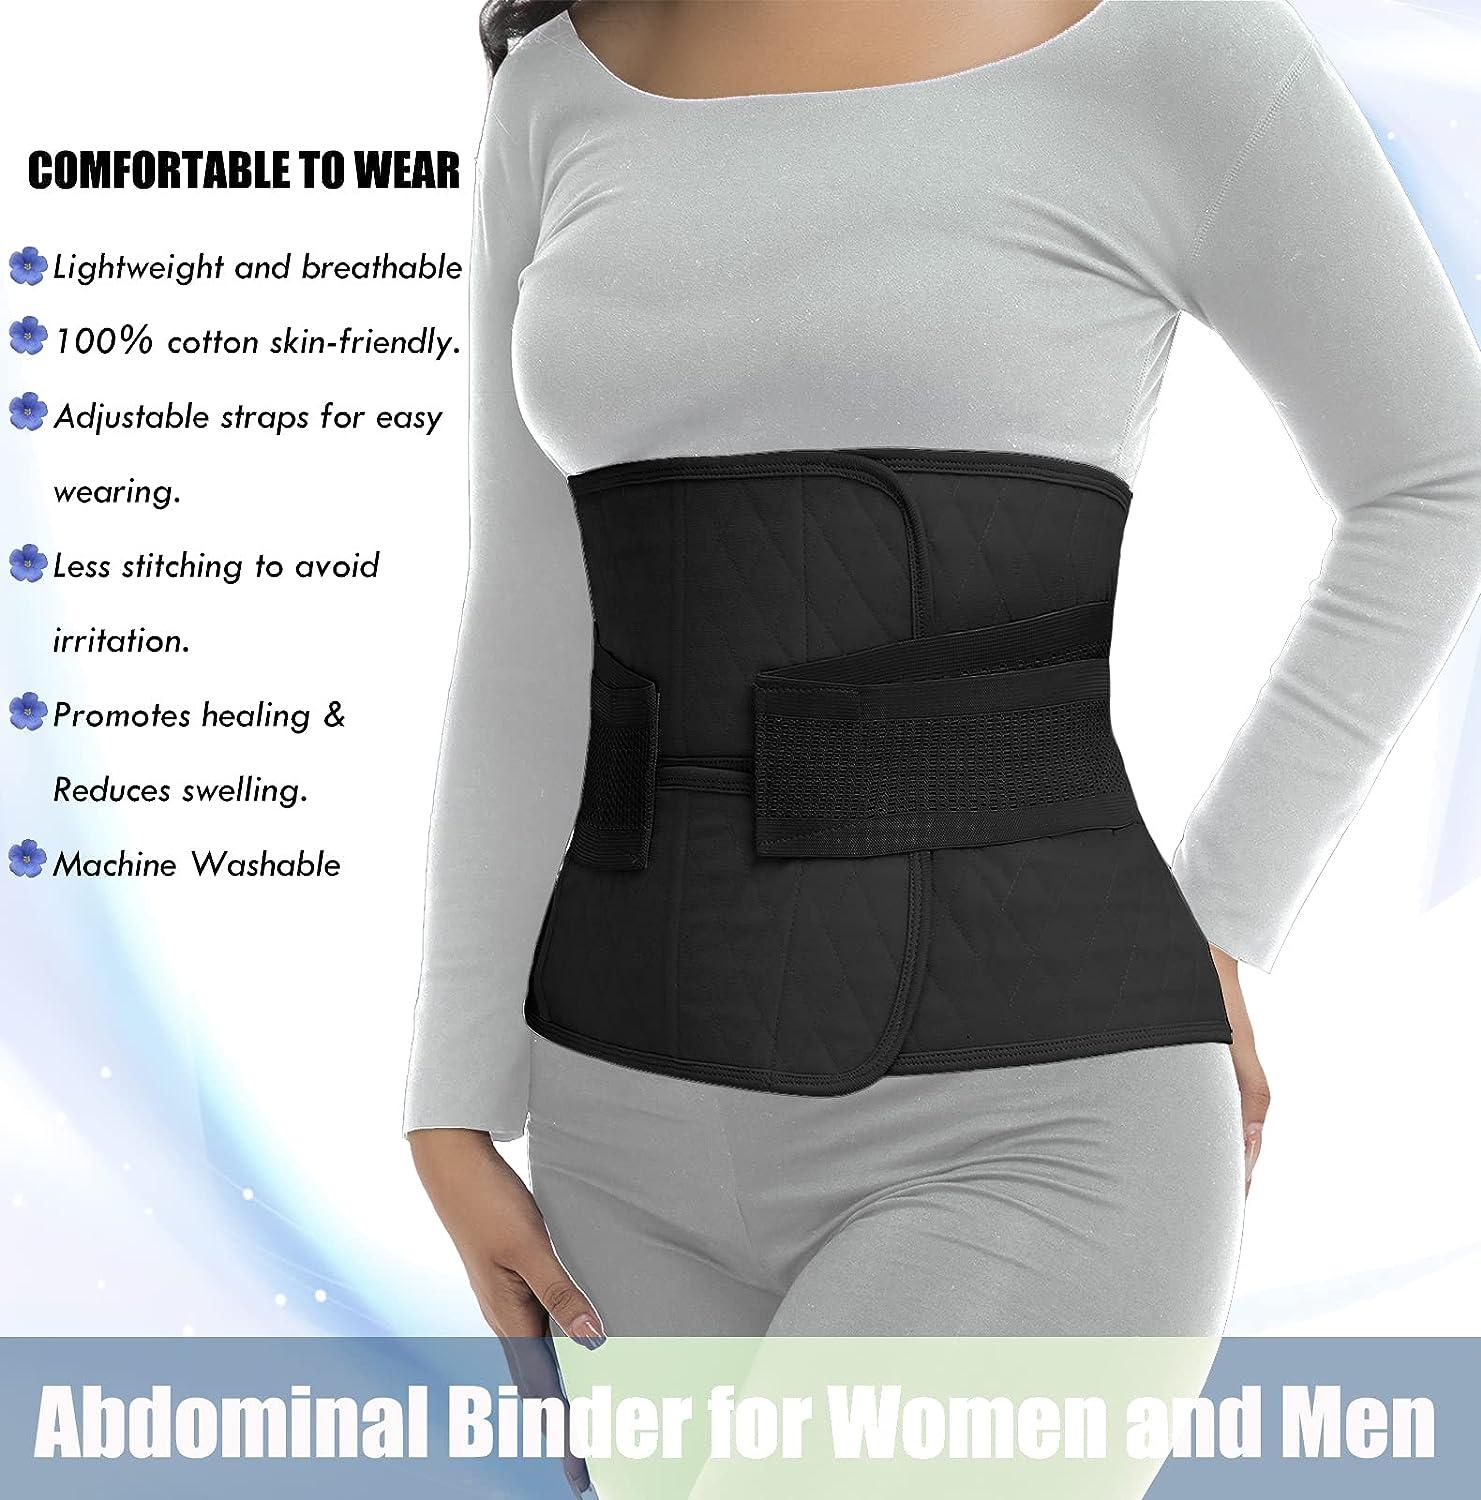 Best Tummy Reducing Belt After C-Section - Ease Backache & Promote Mobility  